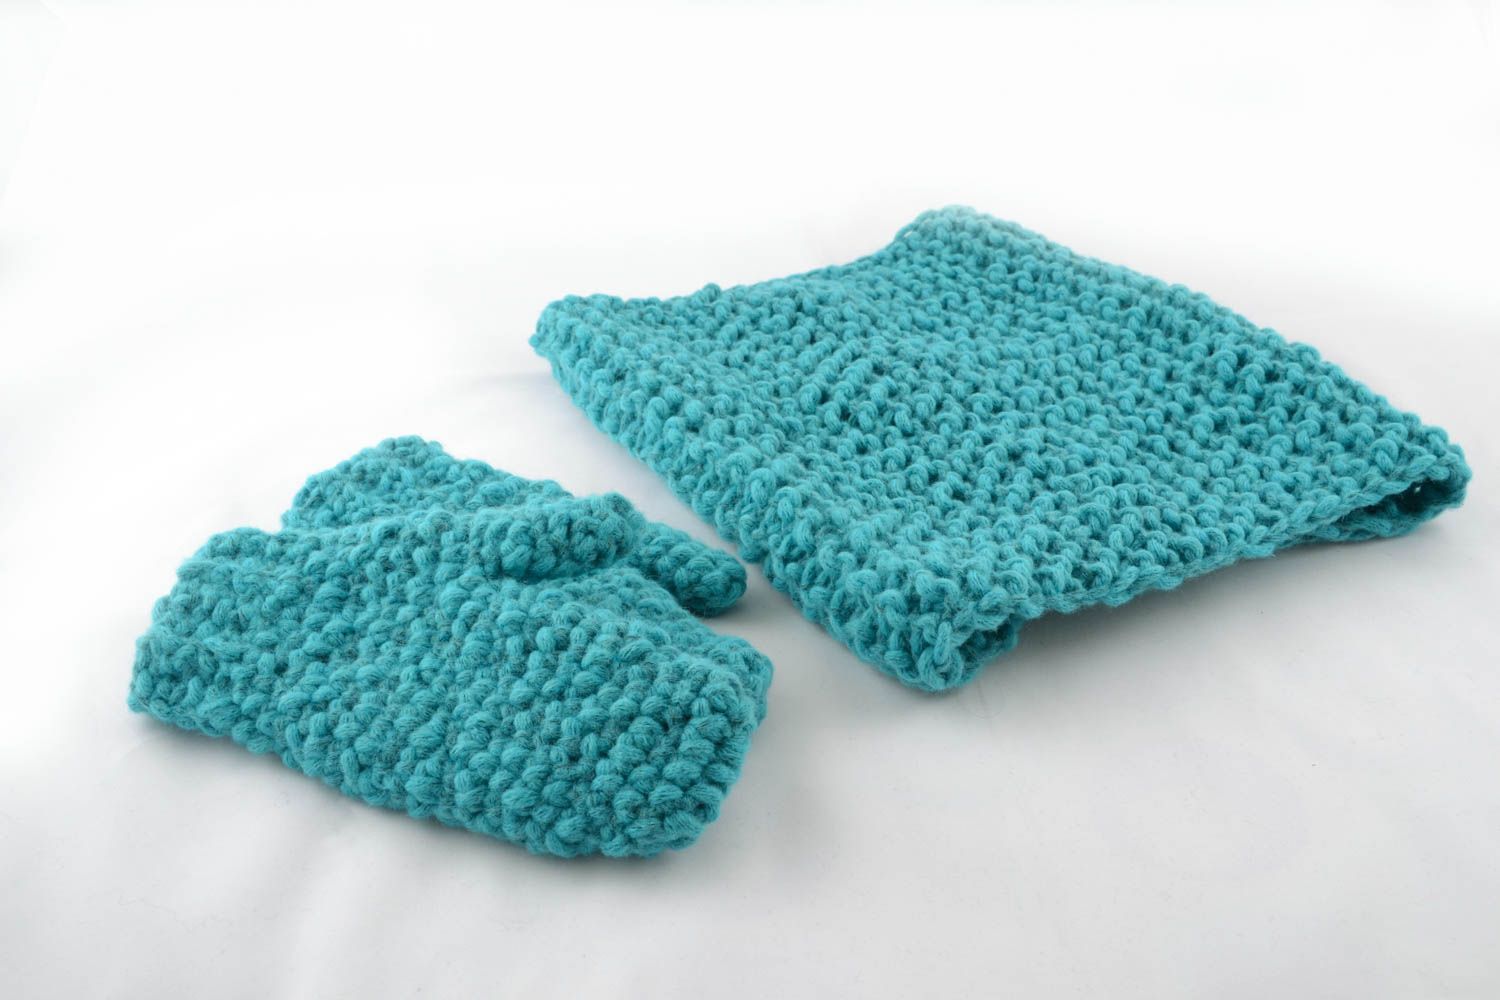 Crochet scarf and mittens photo 2